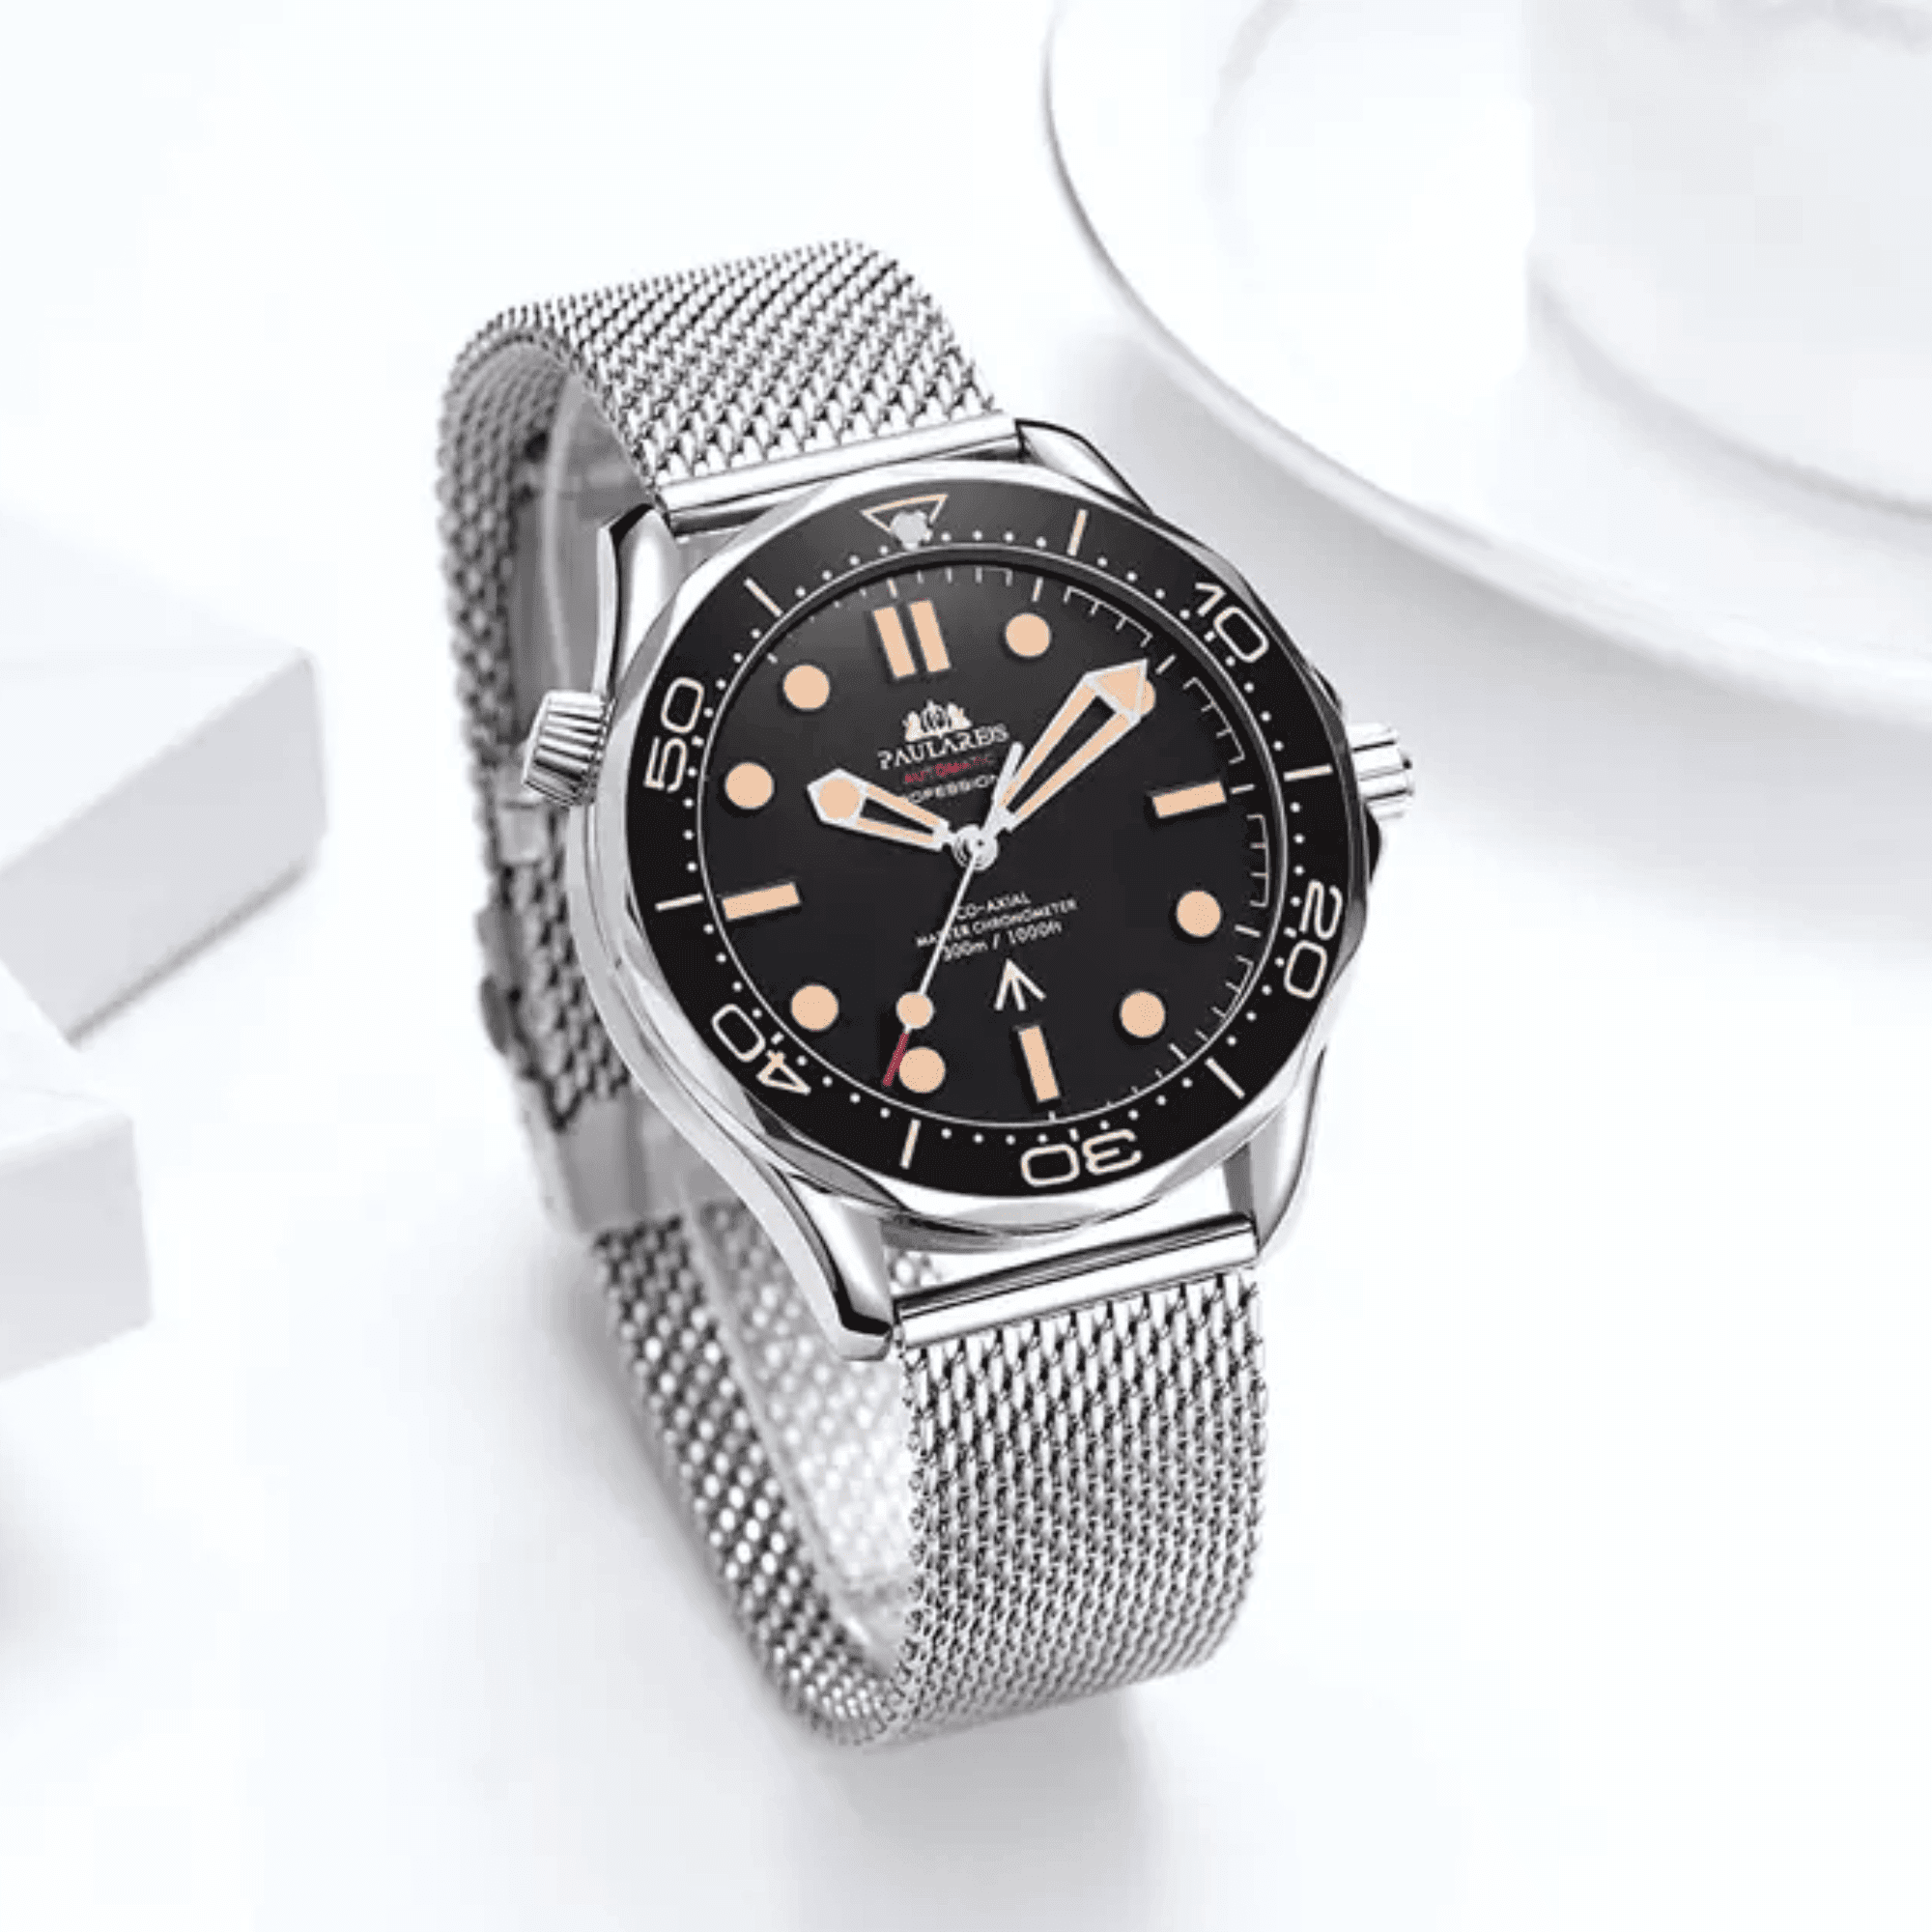 PAULAREIS Seamaster Homage Automatic Movement | Stainless Steel Dial Men's 40MM Watch | Black Dial with Steel Mesh Strap Paularies watches india dream watches